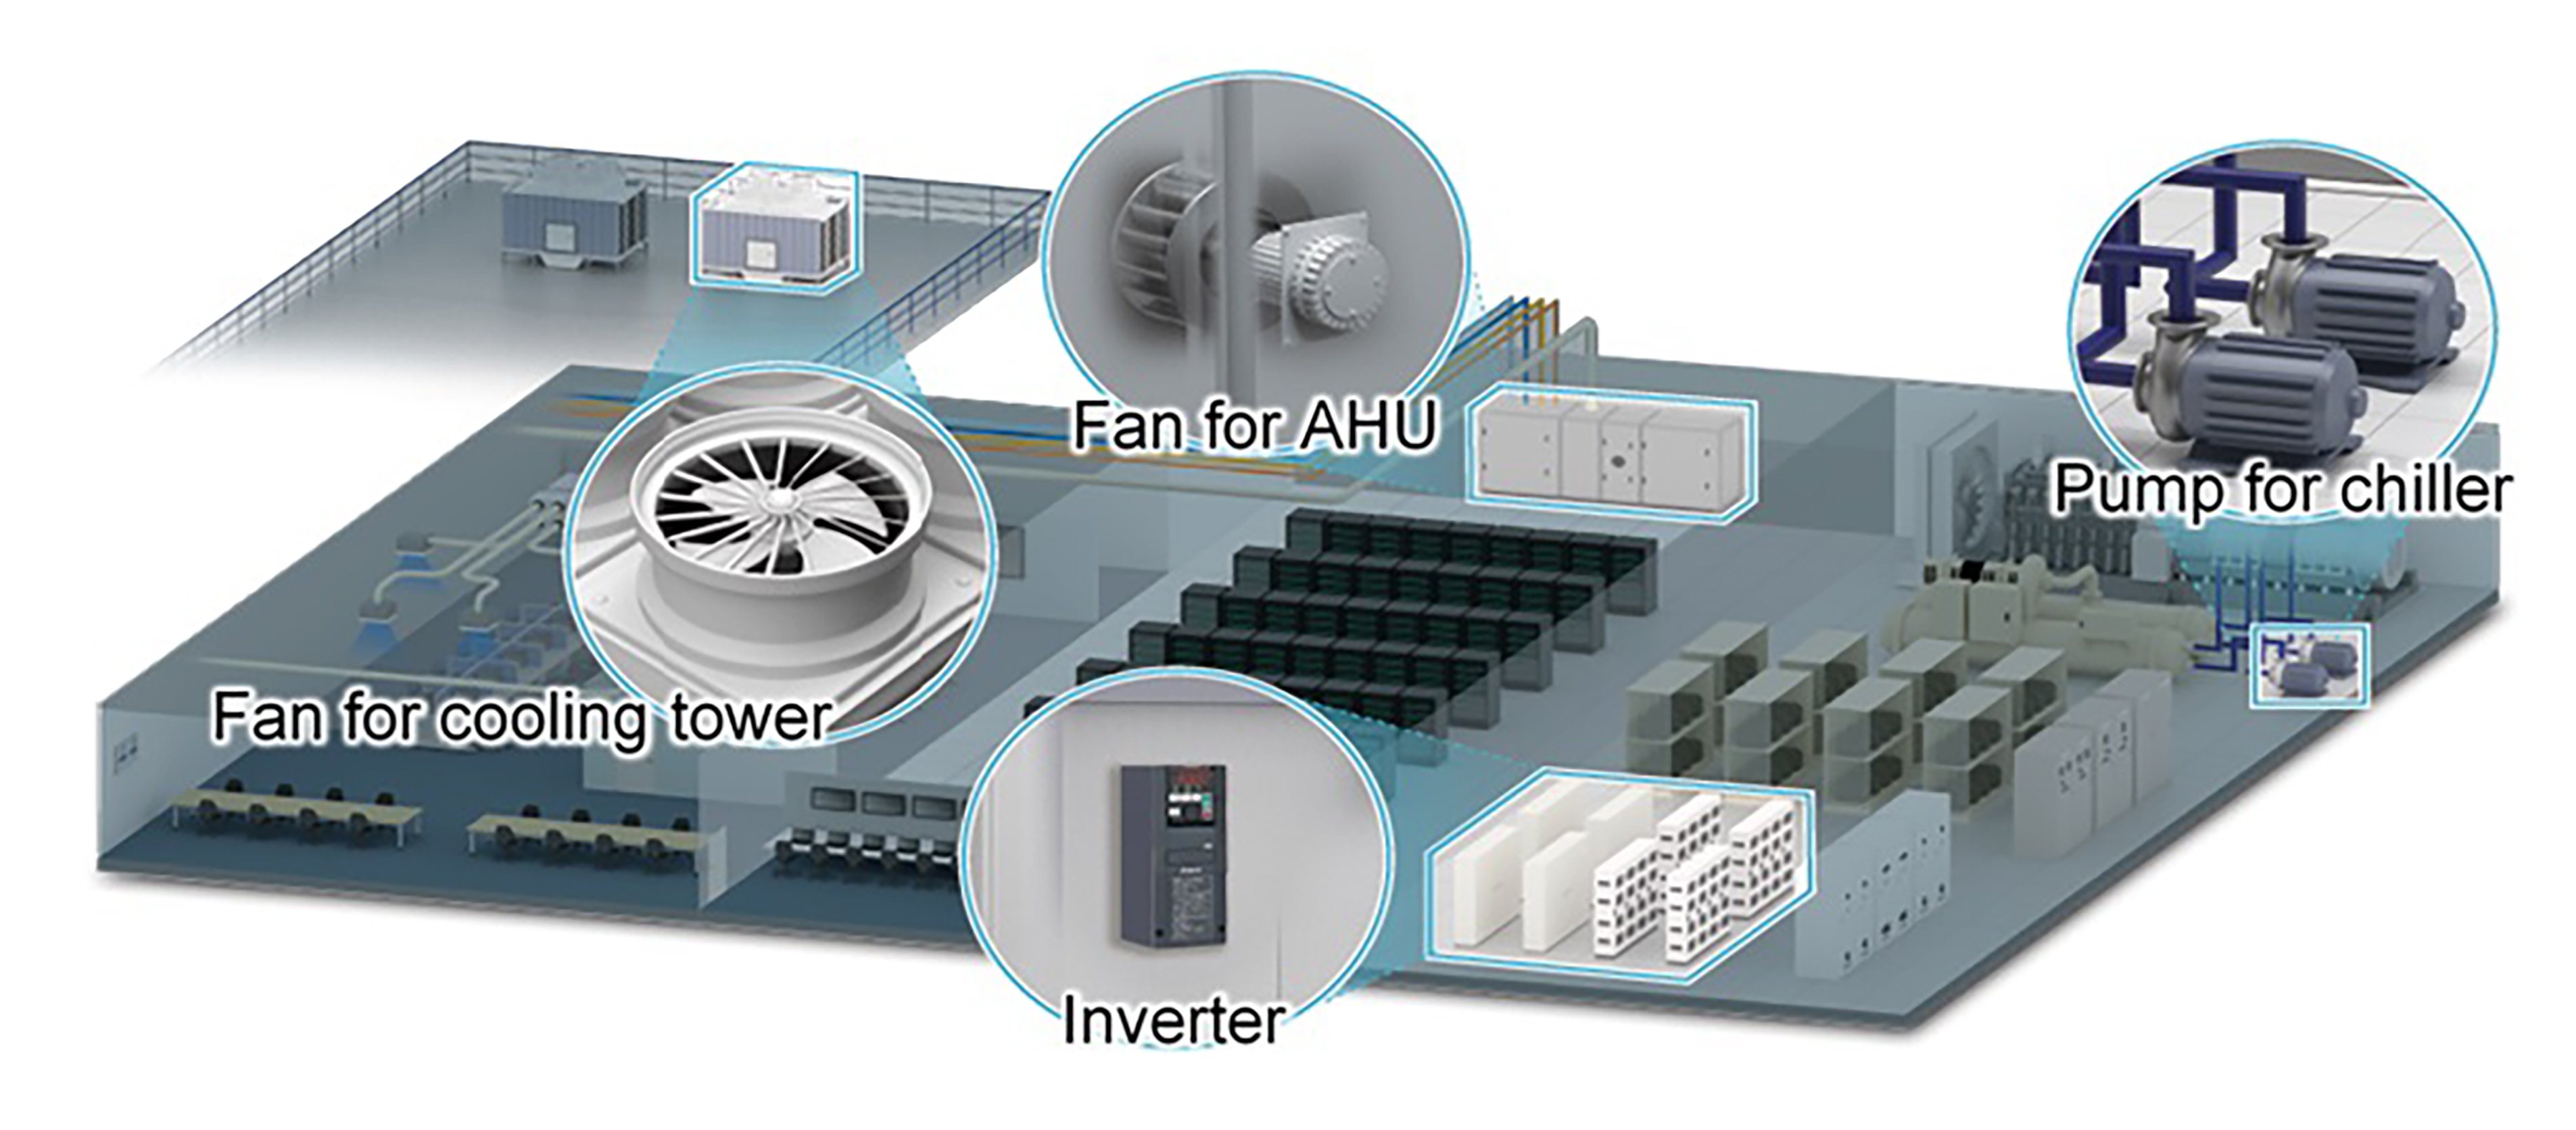 One example to increase energy efficiency is the use of inverters for motors that drive pumps and fans in the air conditioning systems. [Source: Mitsubishi Electric Corporation, Japan]